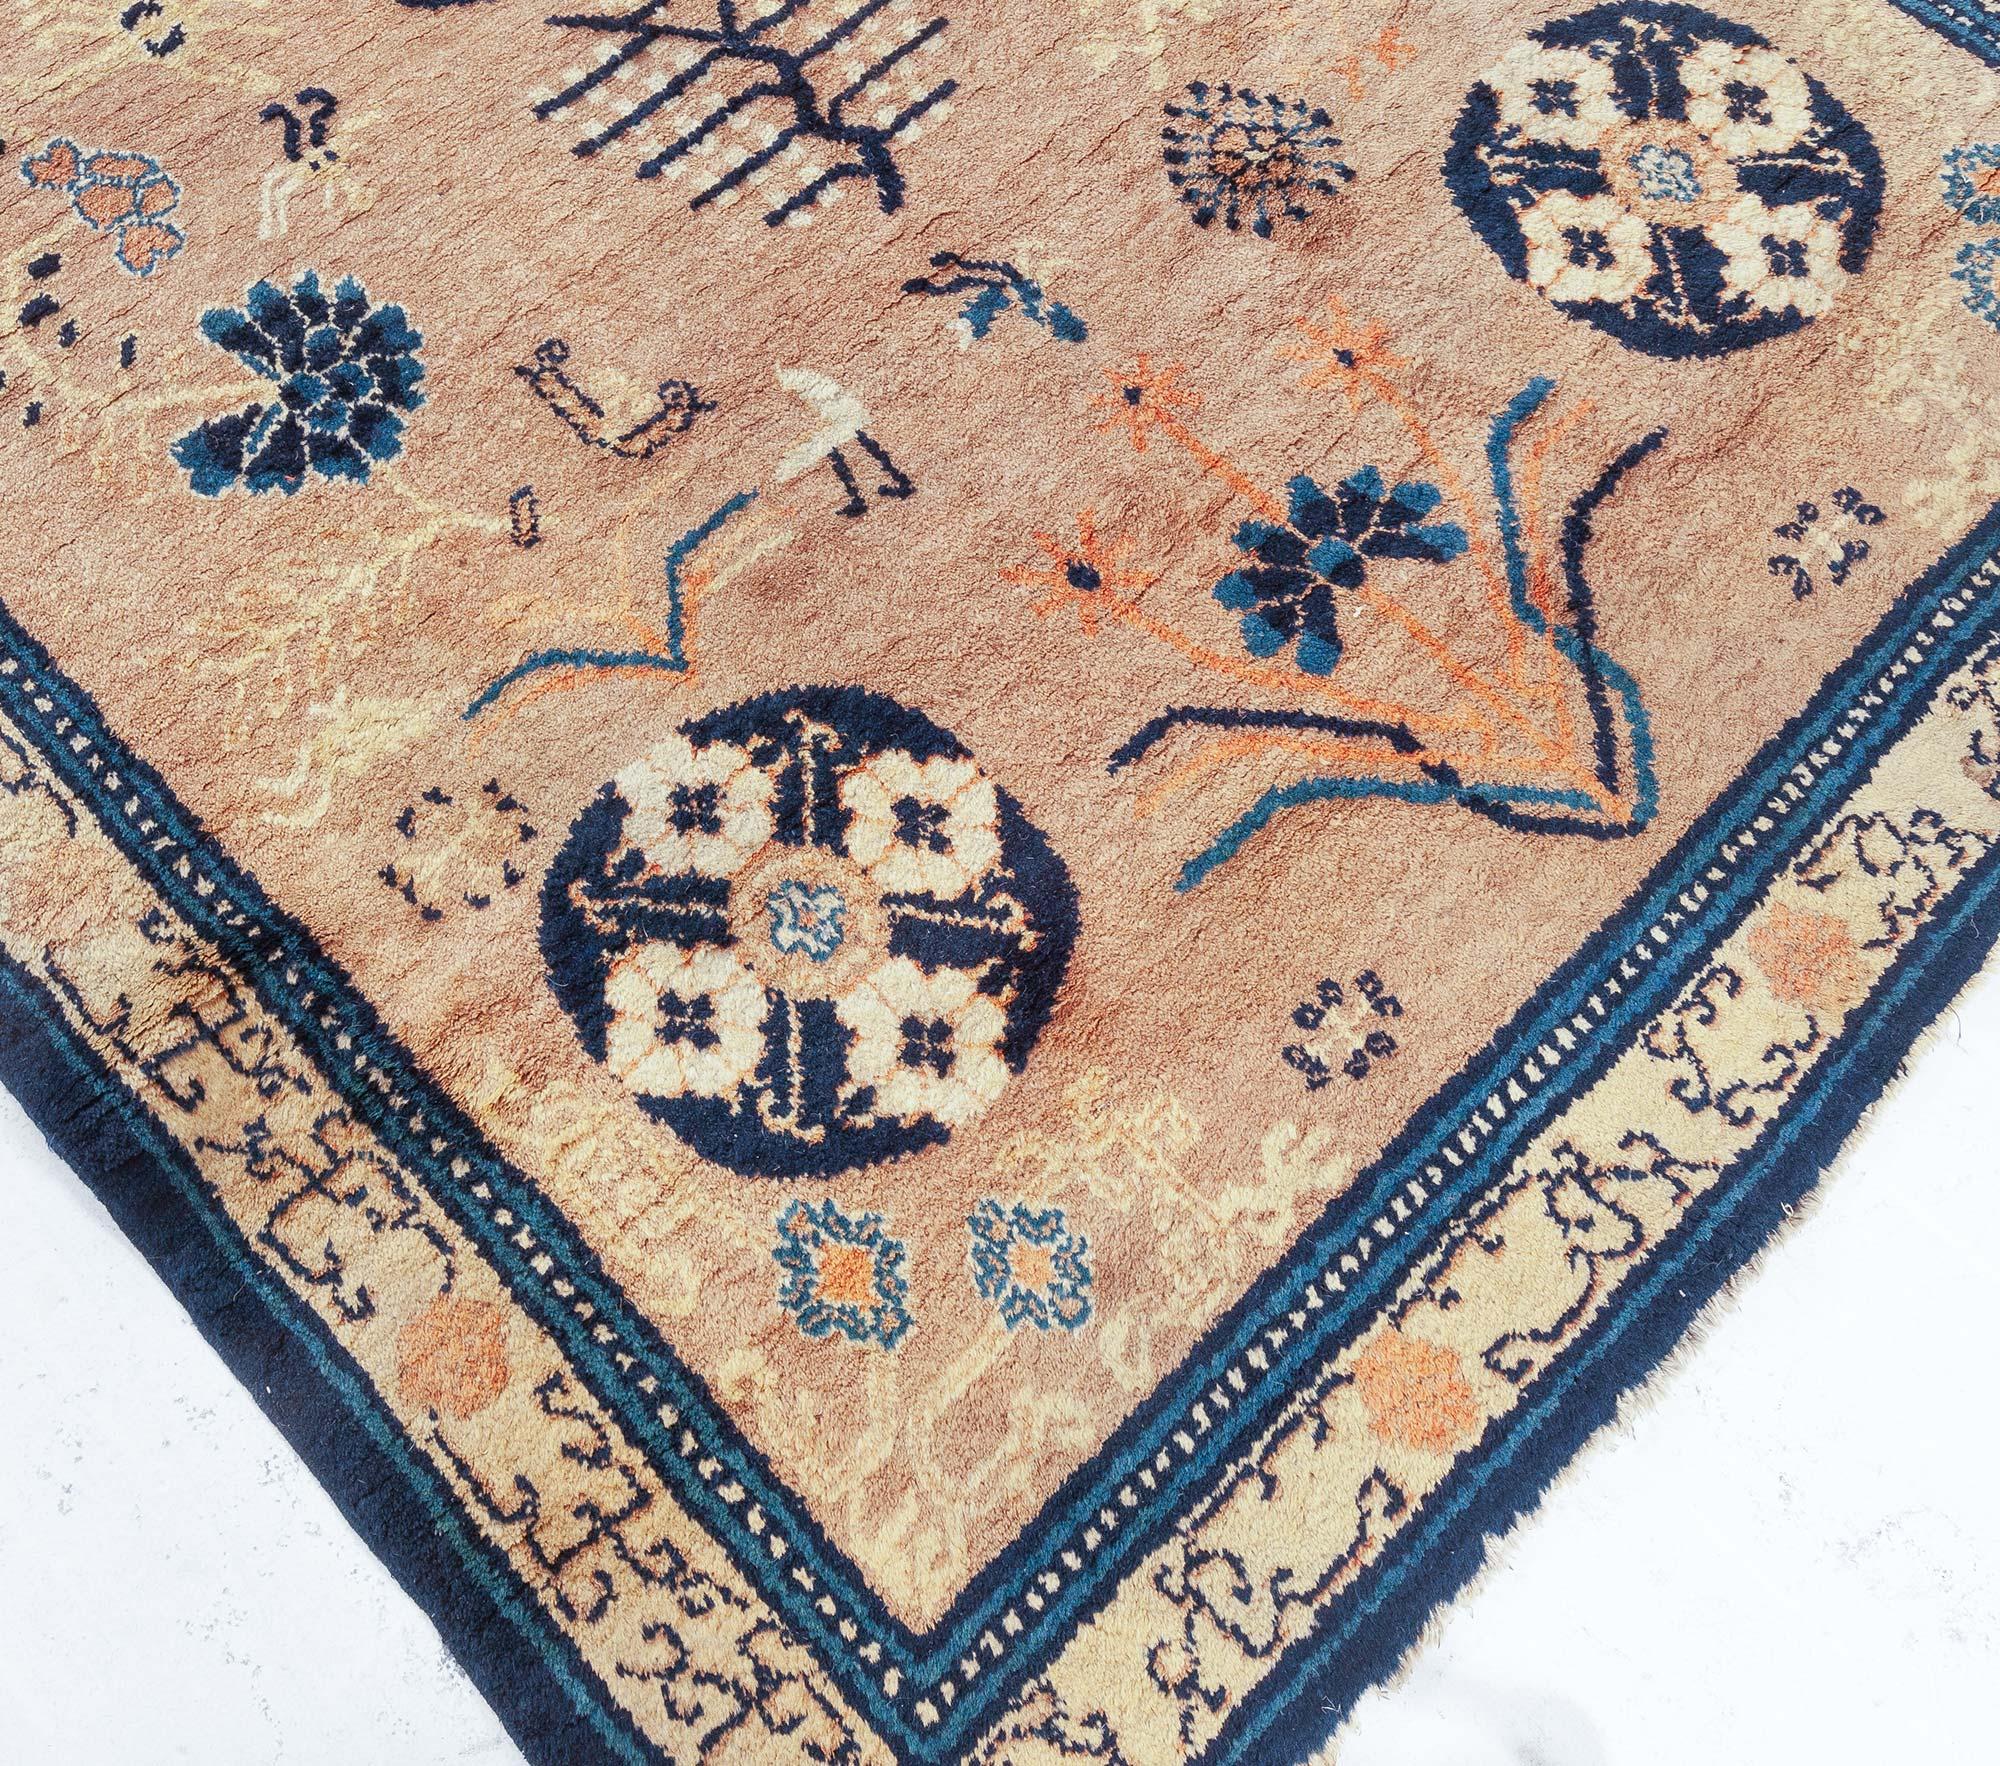 Midcentury Samarkand Handmade Wool Carpet In Good Condition For Sale In New York, NY